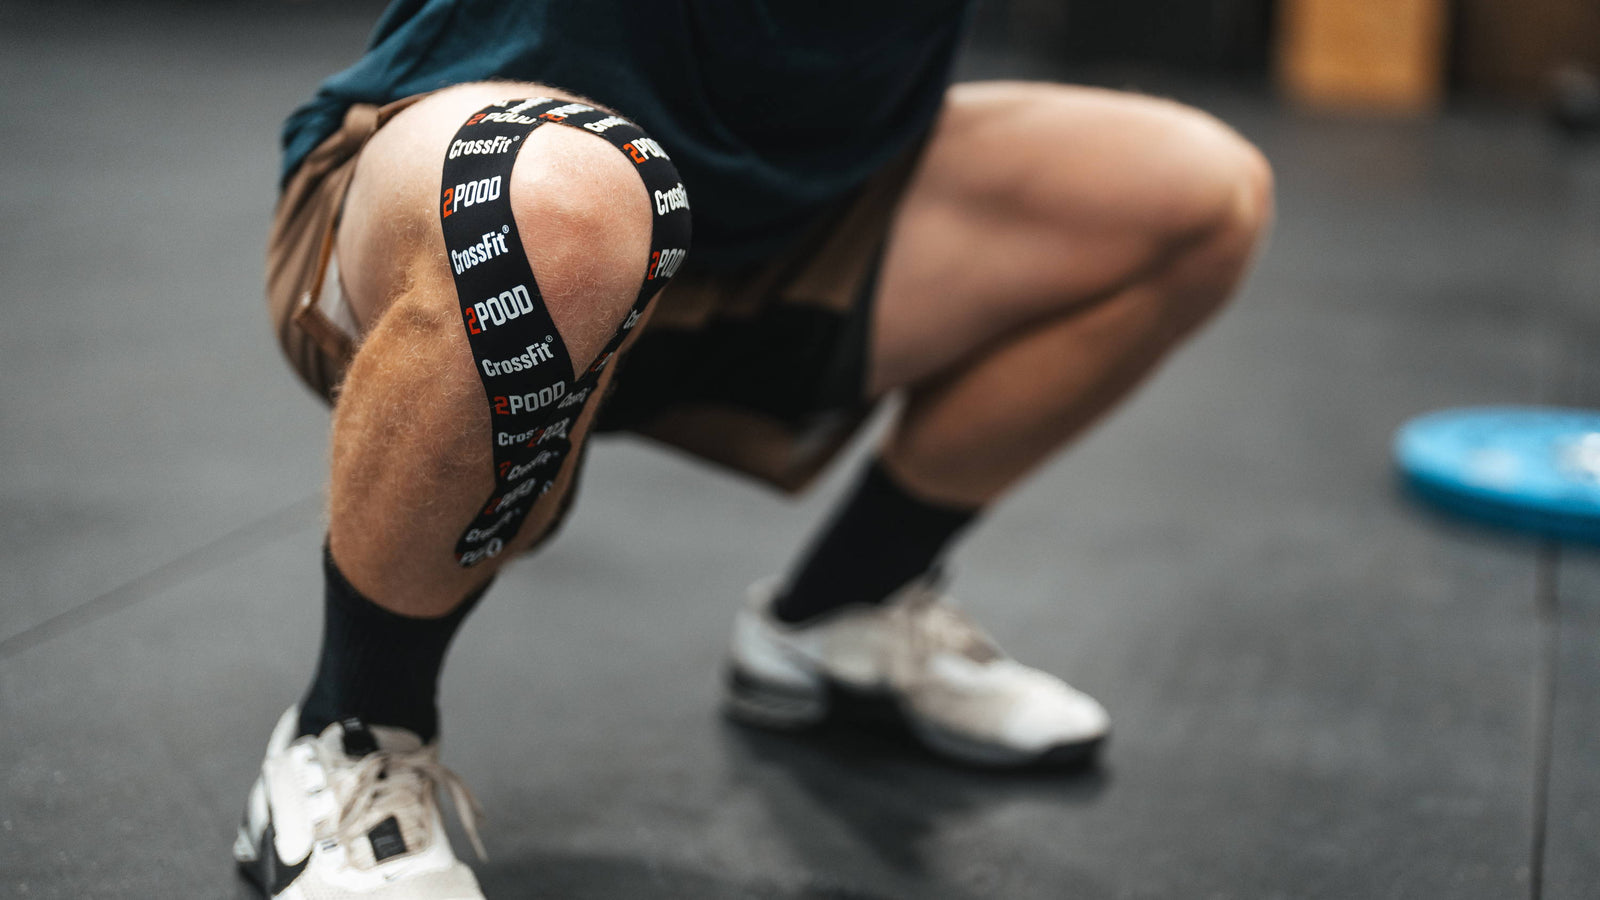 Kinesiology Tape: What Is It and Why Use It?